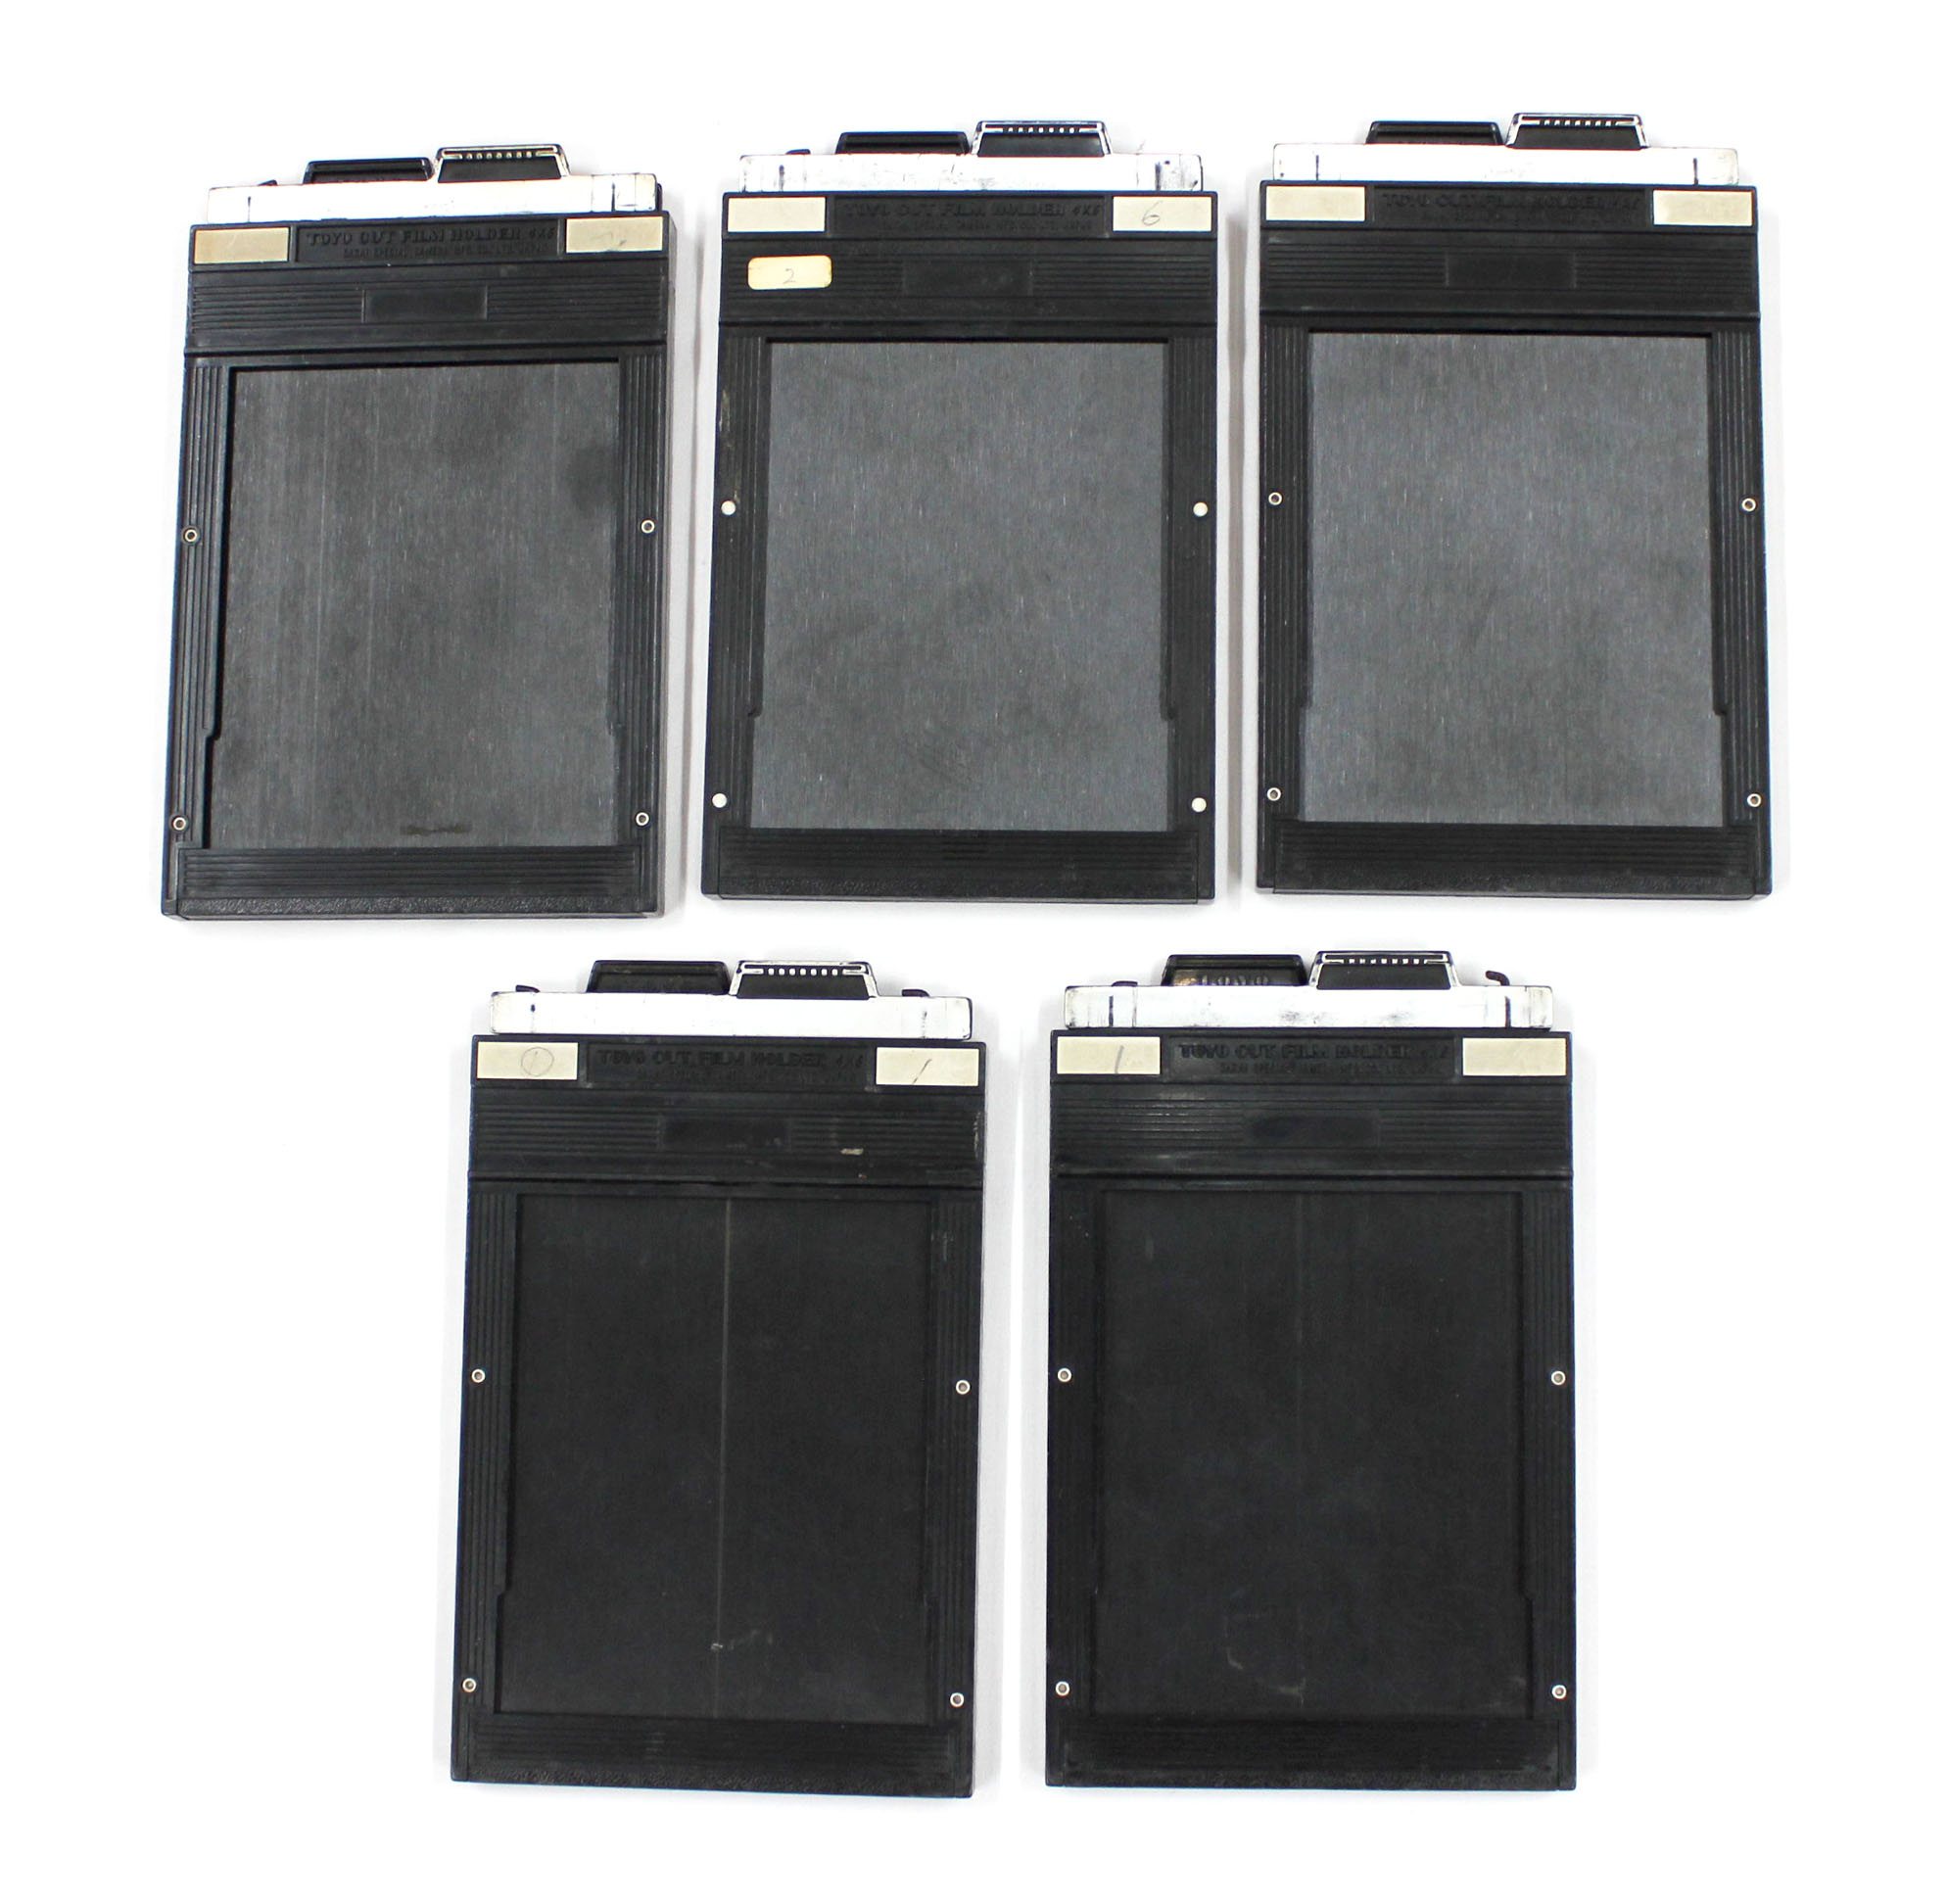 Toyo 4x5 Cut Film Holder Lot of 5 from Japan Photo 0